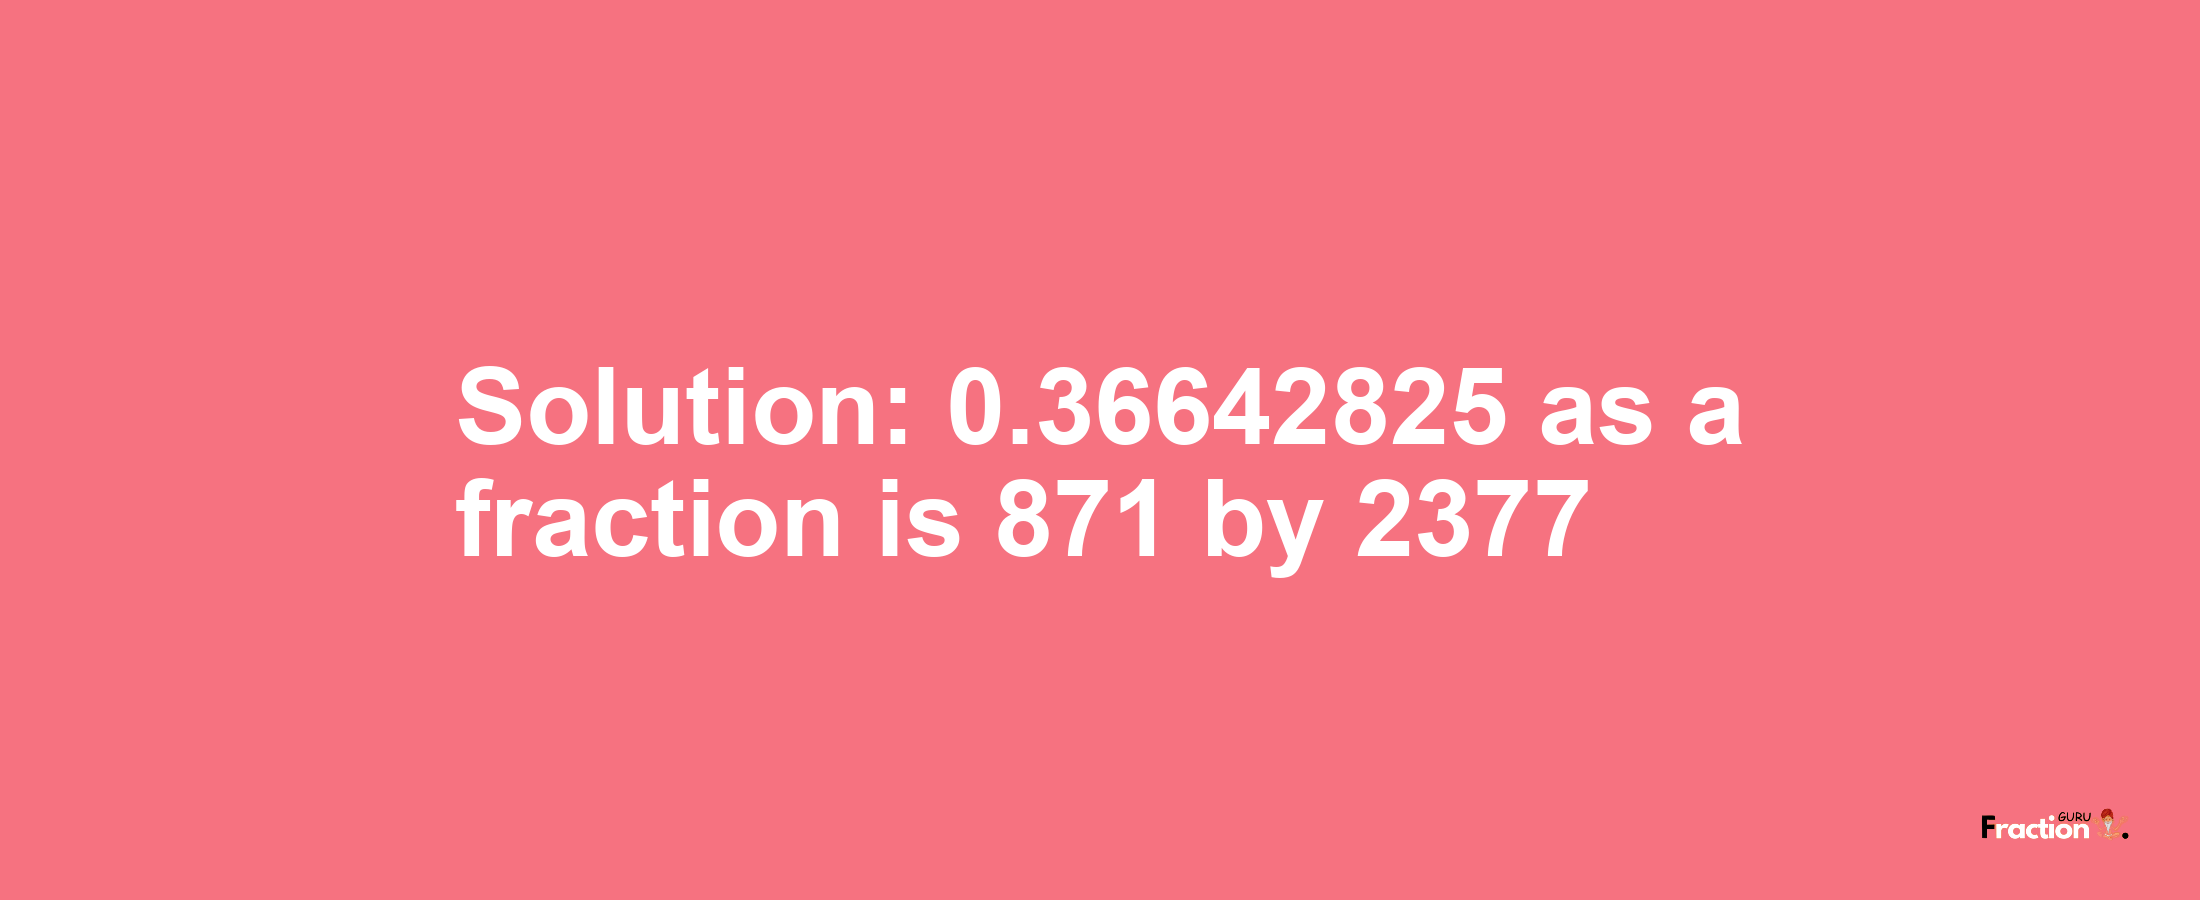 Solution:0.36642825 as a fraction is 871/2377